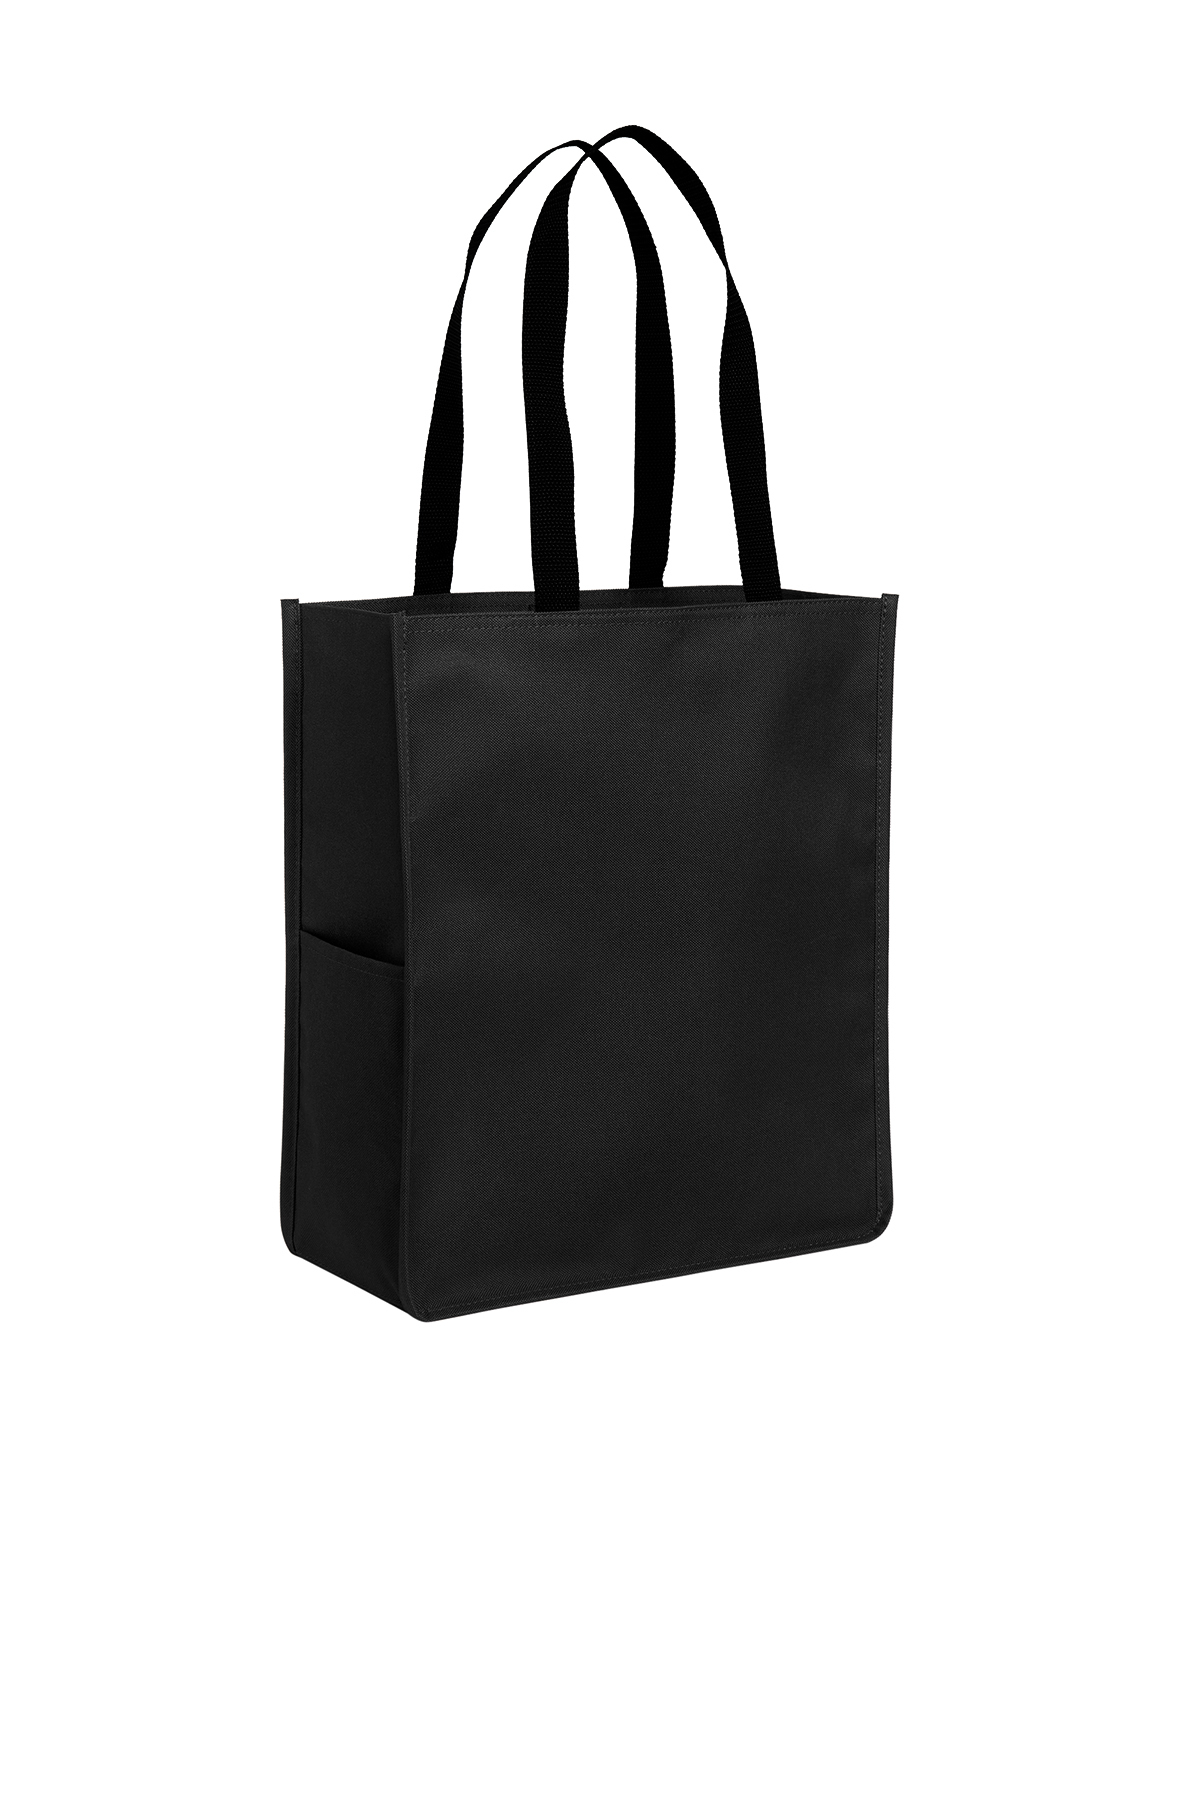 Port Authority Upright Essential Tote | Product | SanMar